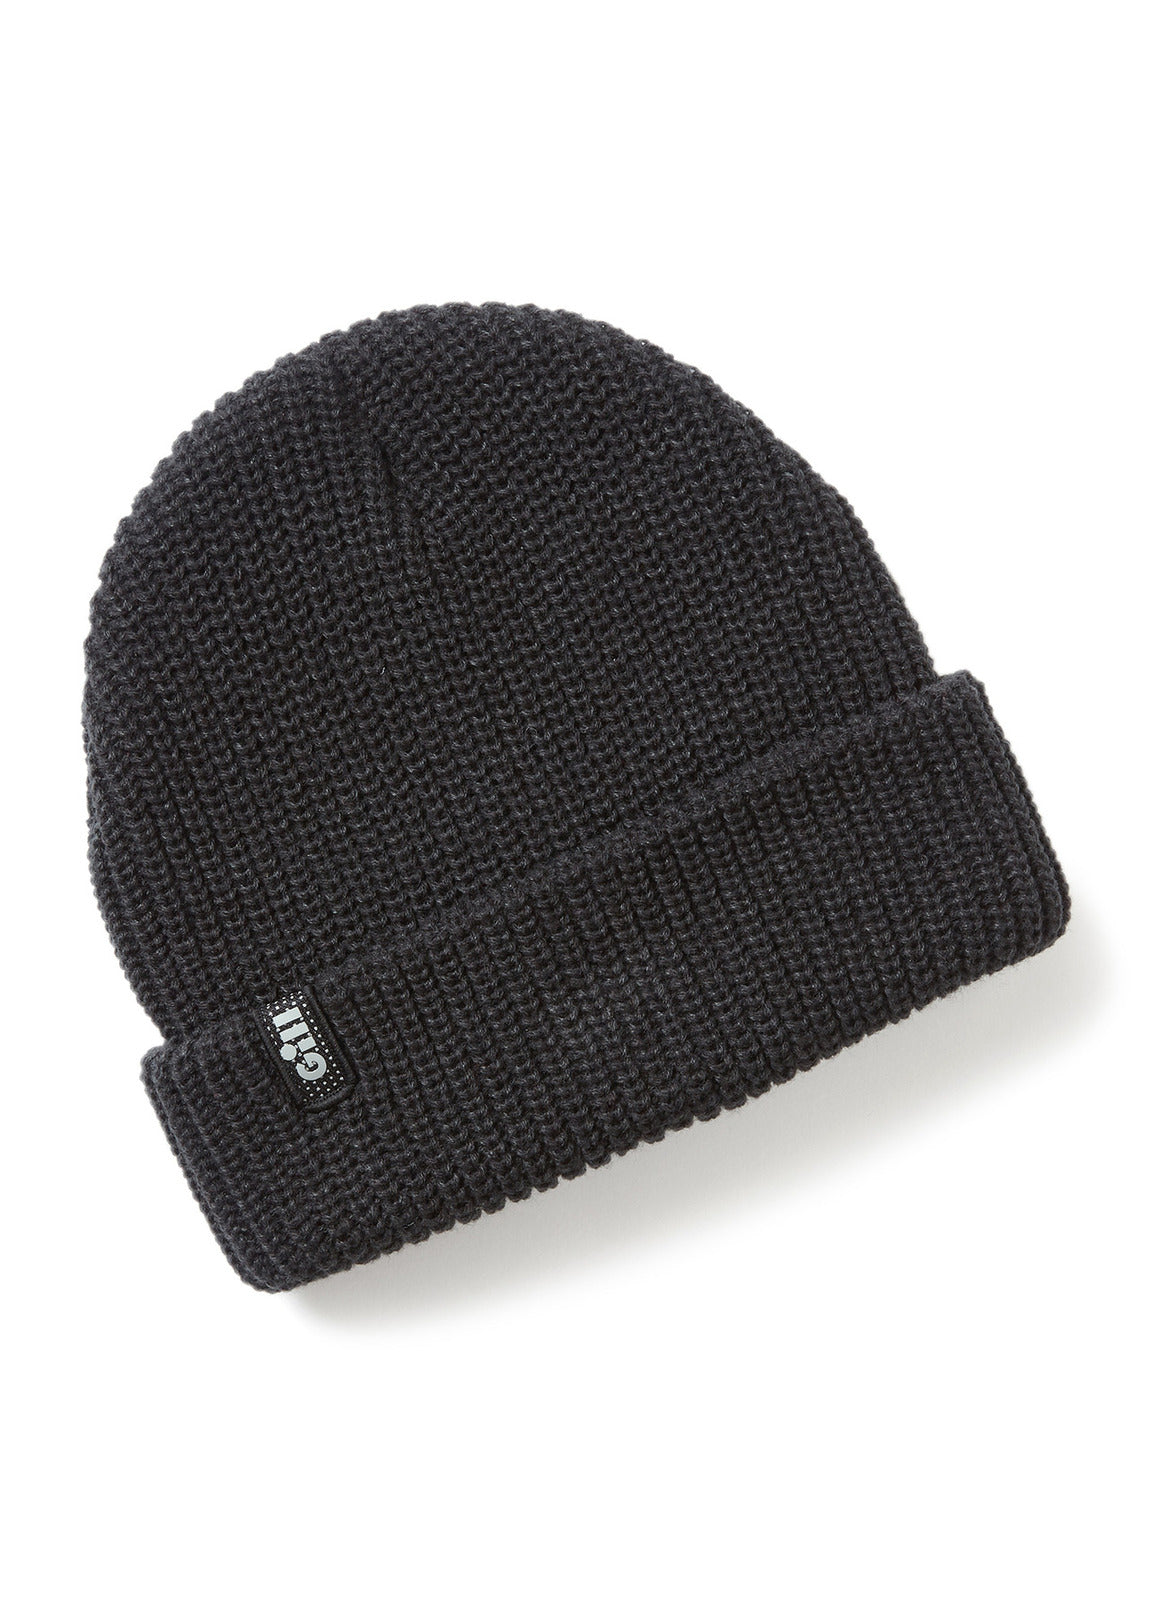 Gill Floating Knit Beanie - Graphite